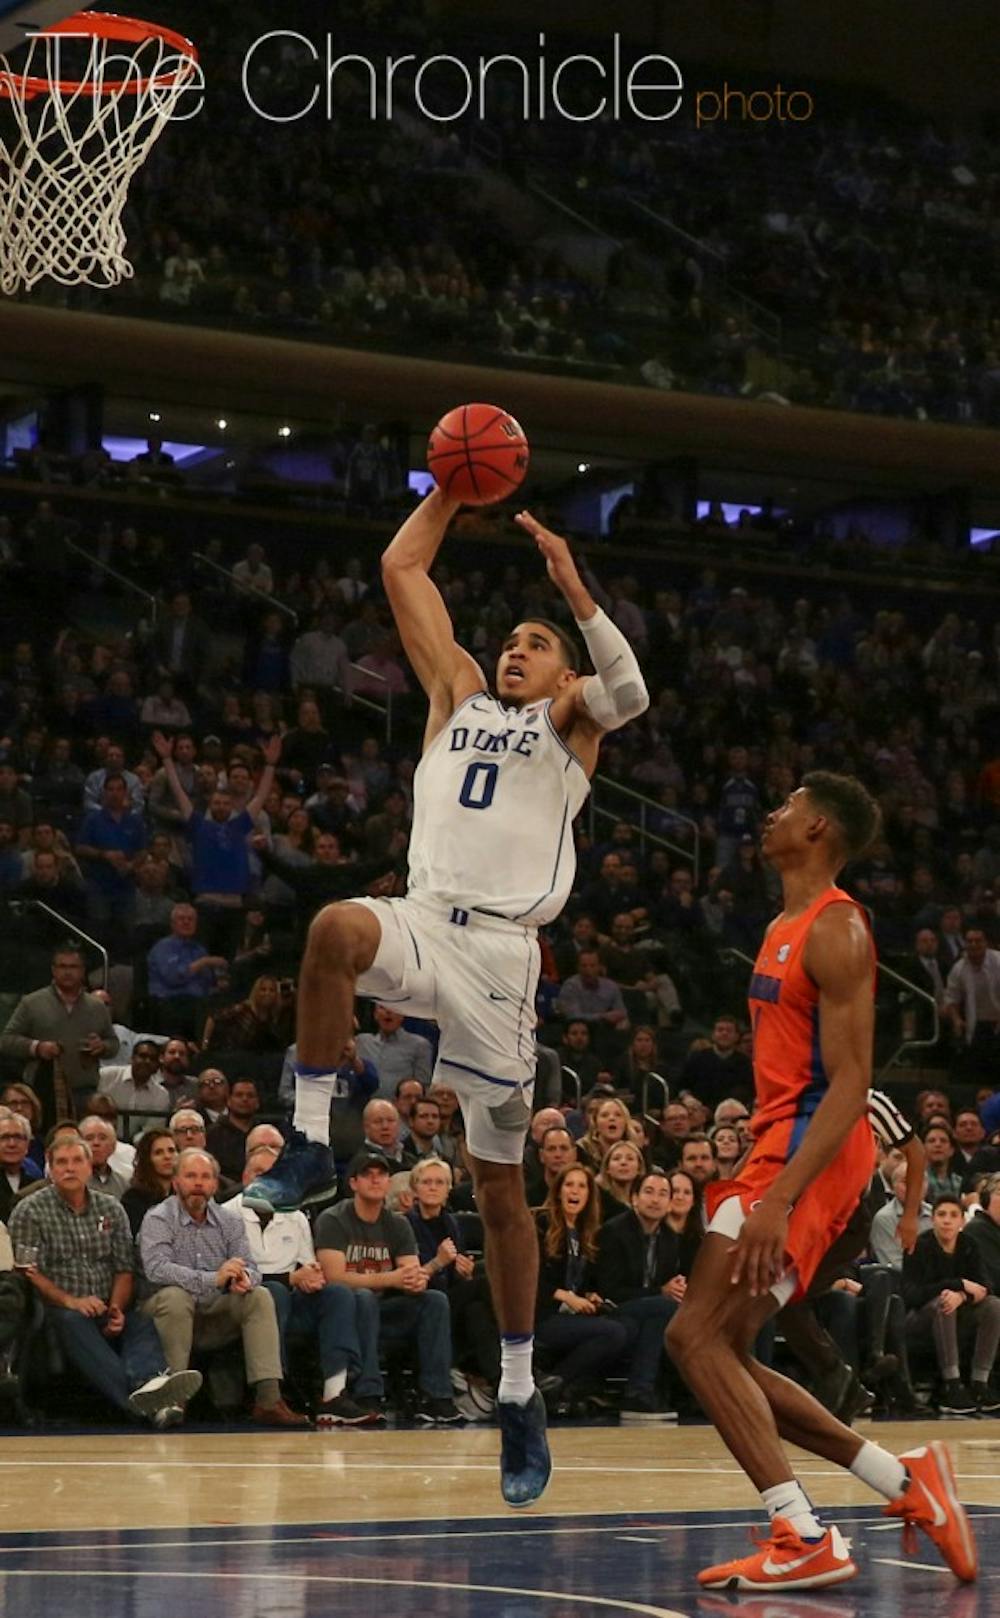 Freshman Jayson Tatum scored 22 points on 7-of-12 shooting and added eight rebounds, sparking his team in the frontcourt alongside Amile Jefferson.